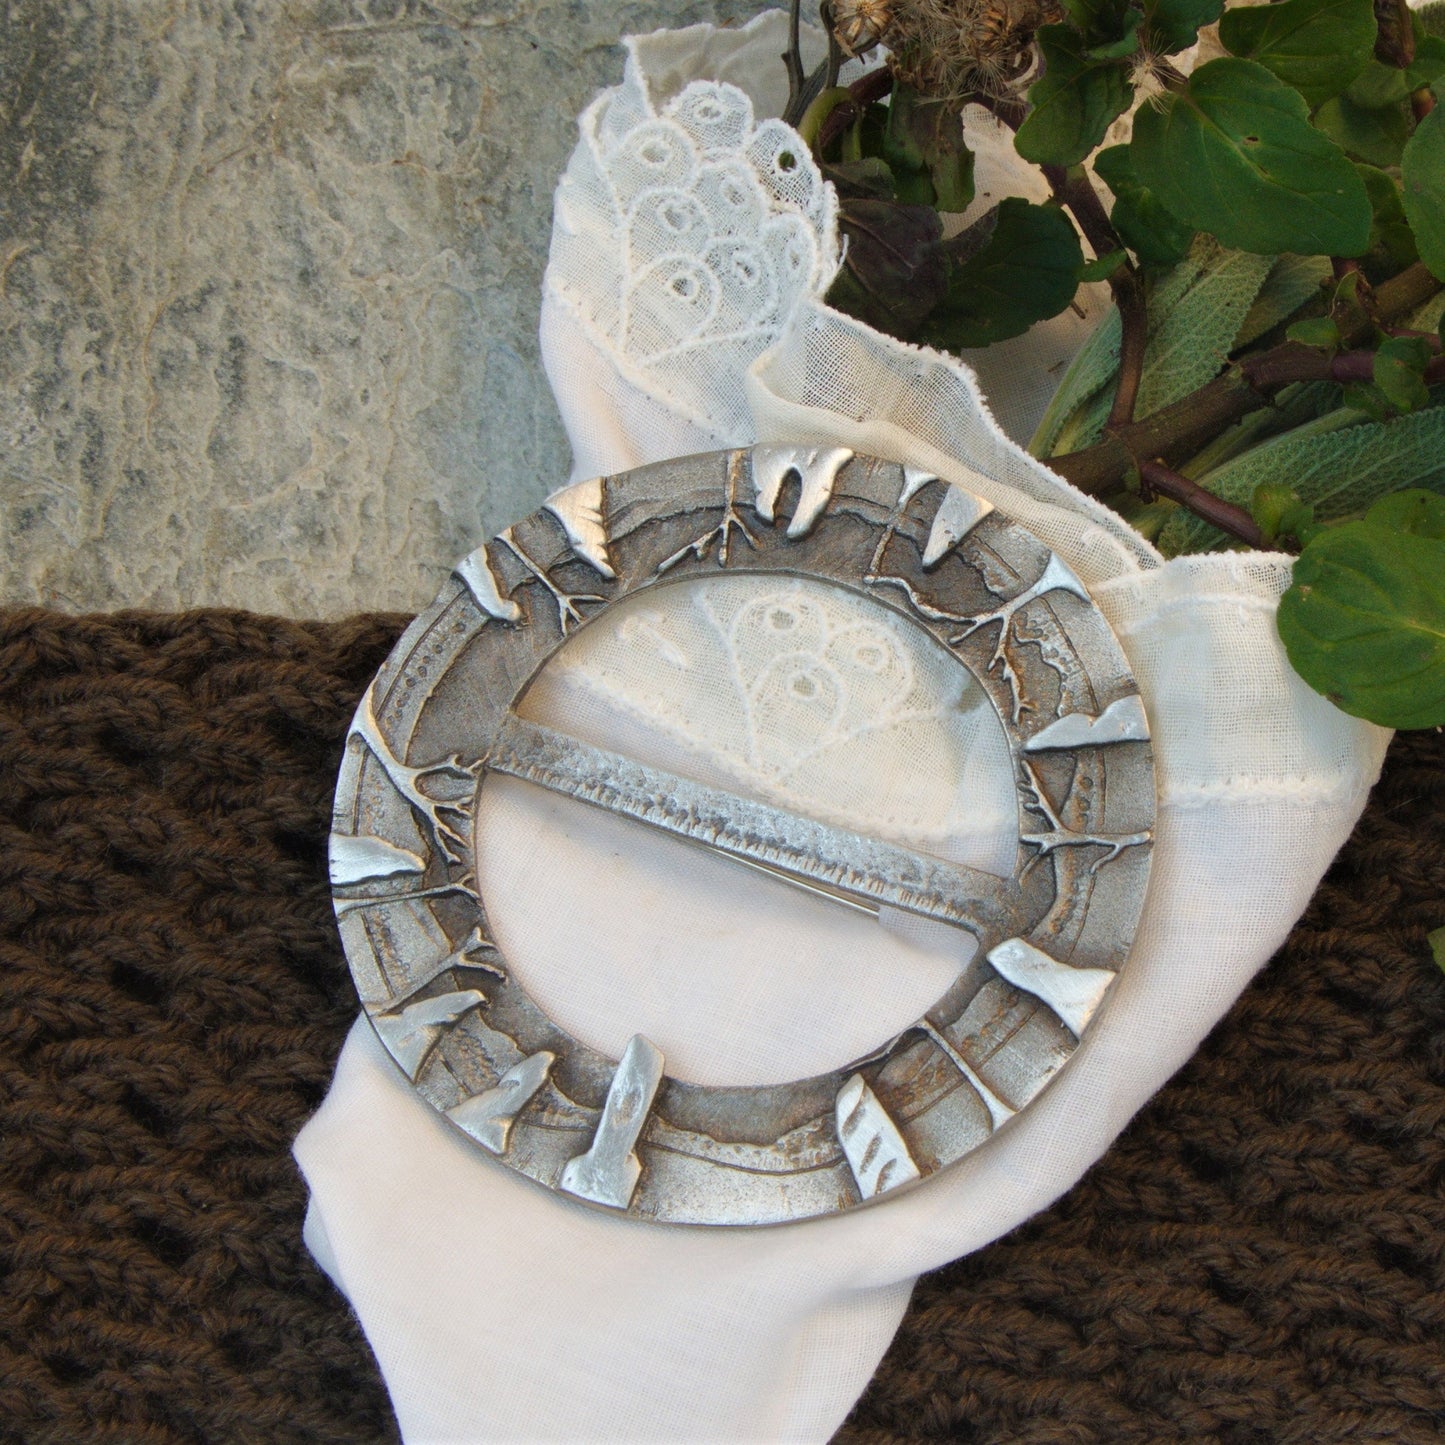 Based on the Craigh na Dun stone circle featured in the Outlander TV series, this Pewter Brooch with bar is handmade by Aurora Orkney Jewellery, Scotland